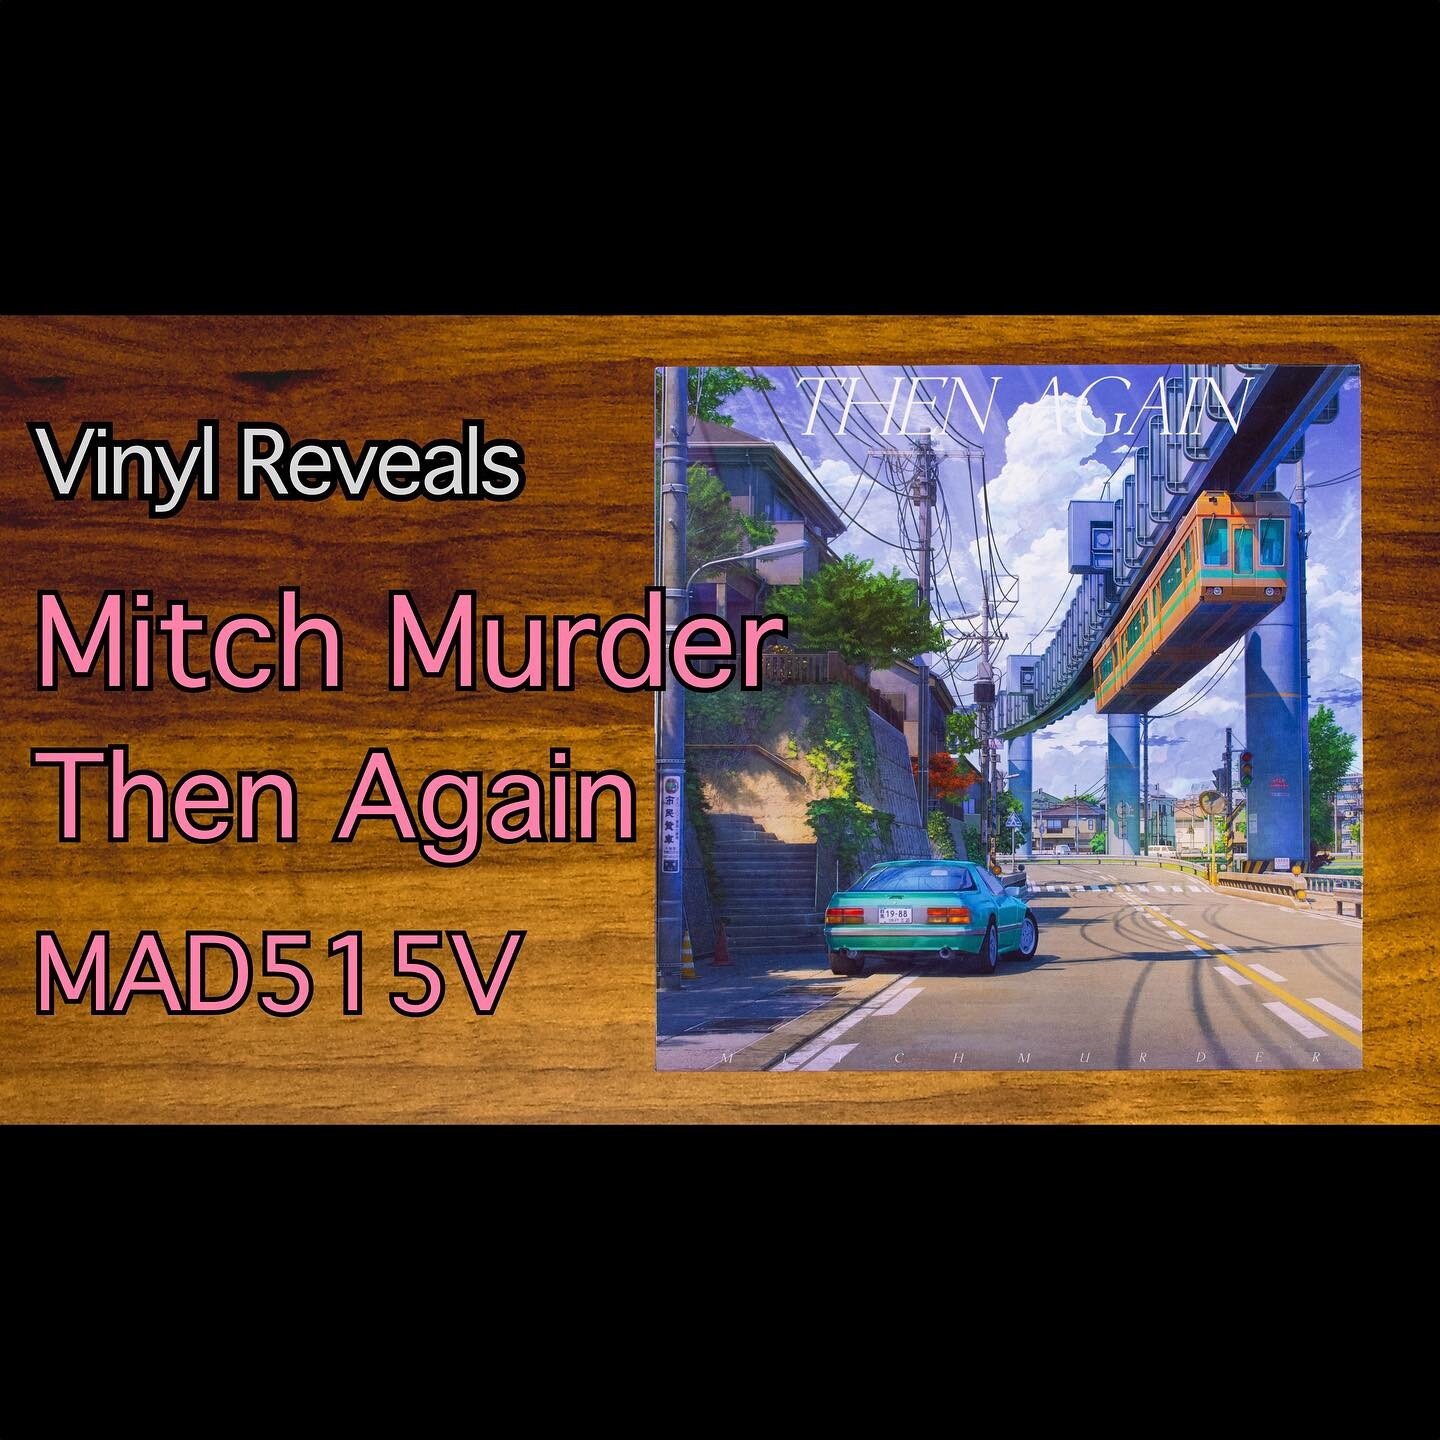 Today we are looking at Then Again by Mitch Murder. Video is now live on the Vinyl Reveals YouTube channel. Link in profile.

#vinylReveal #vinyl #vinylcollection #vinylrecords #records #vinylReveals #vinylcommunity #mitchmurder #mitchmurdermusic #sy